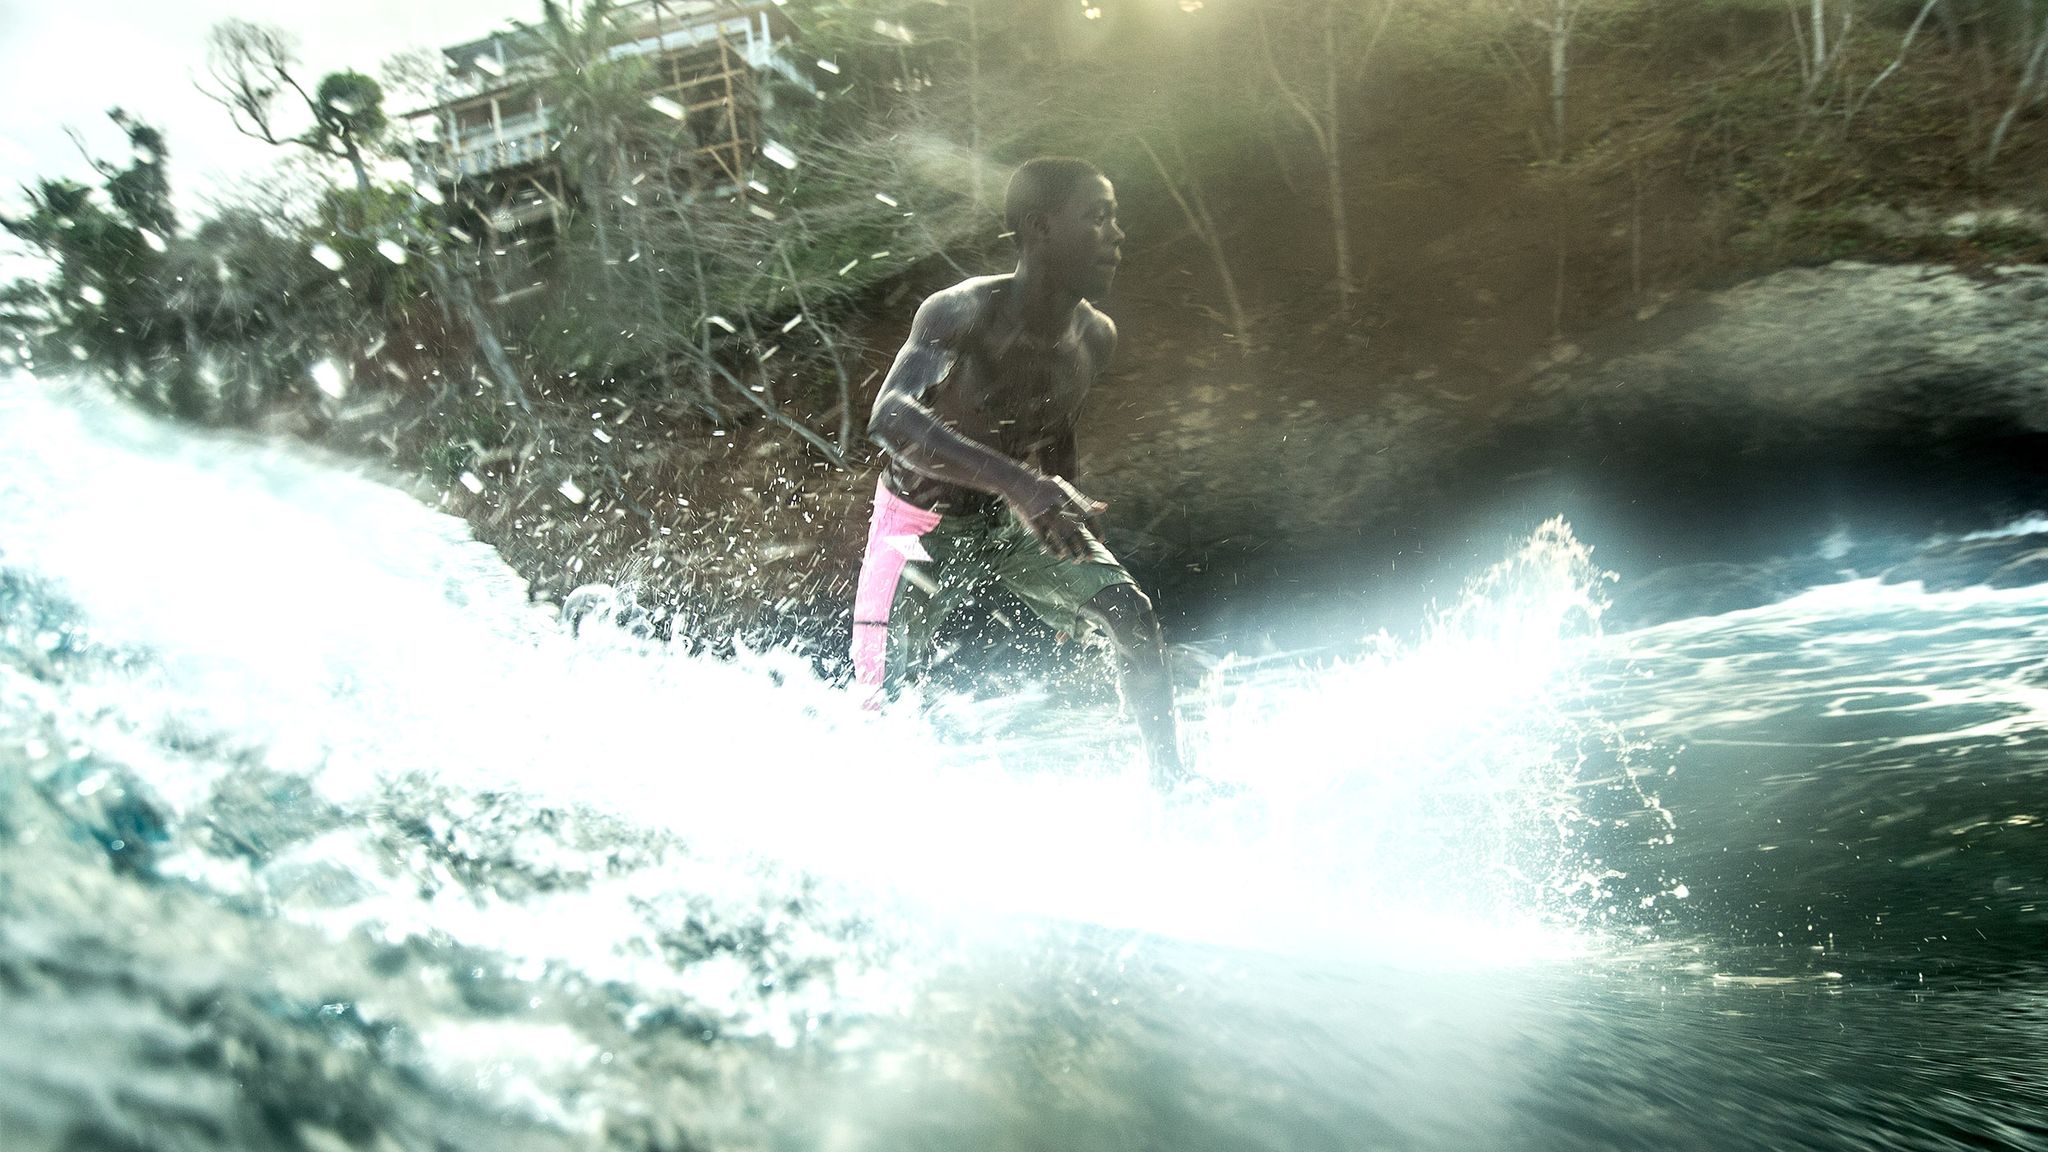 Water, Adventure, Sunlight, Wave, Recreation, Fun, Tree, Extreme sport, Watercourse, Surface water sports, 